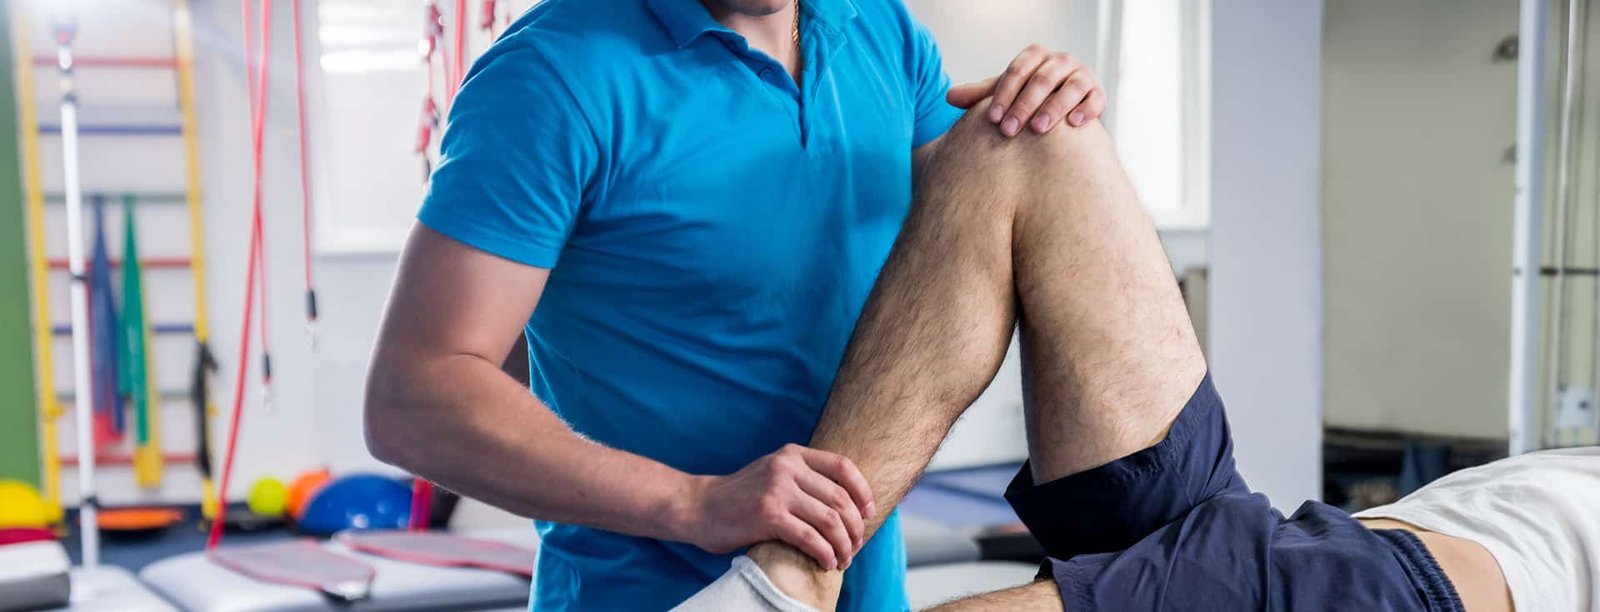 Physio for Knee Pain, Common Conditions and Treatments - Physio Pros